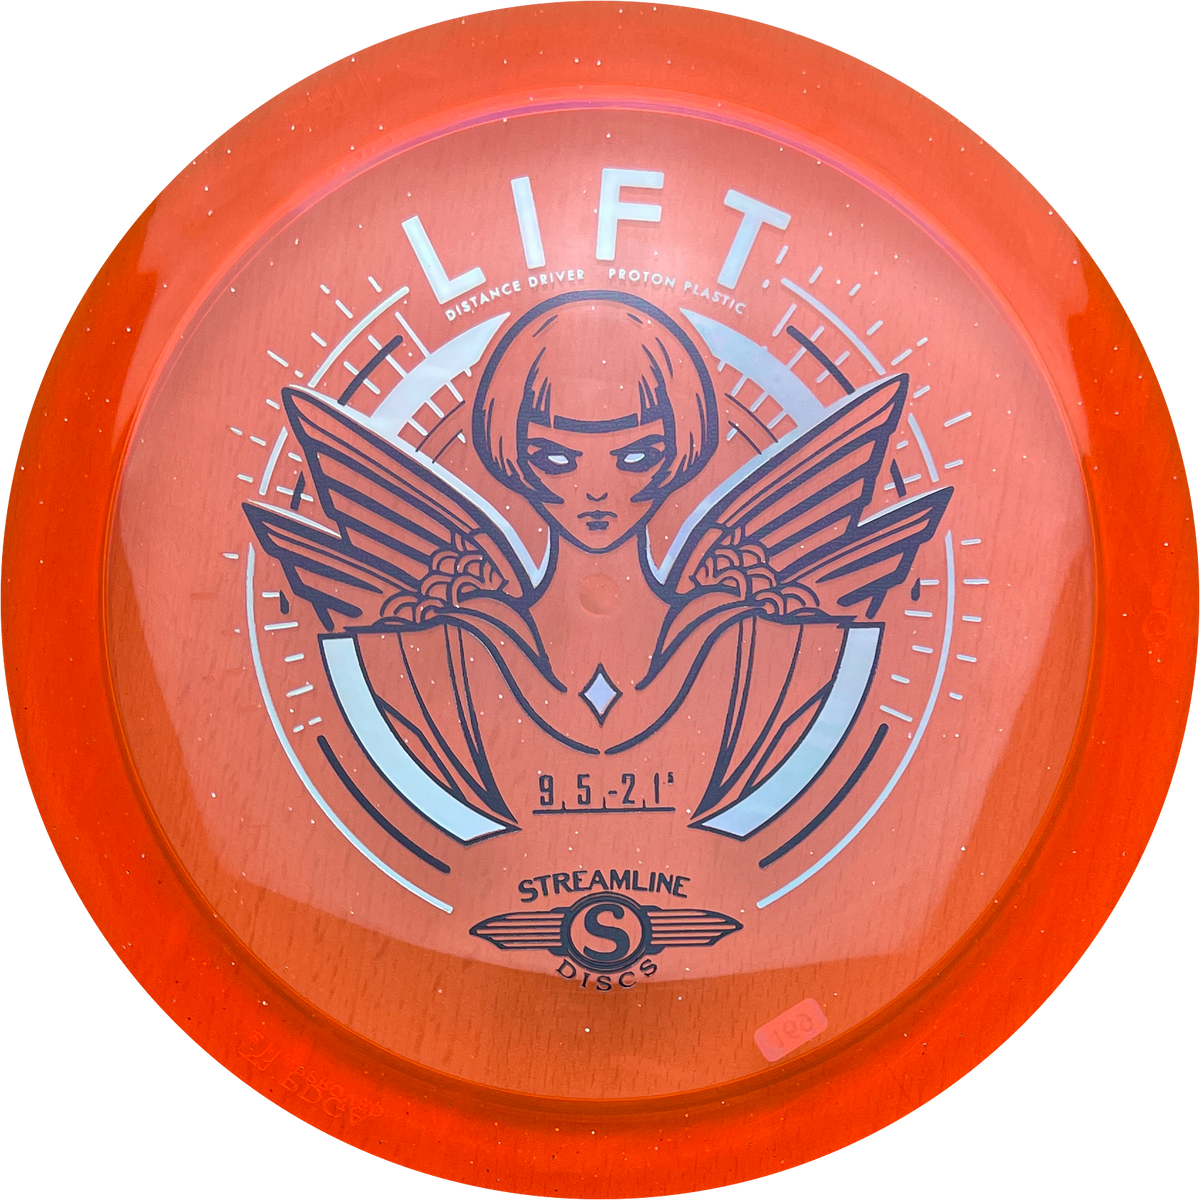 Weight: 175g to 179g – London Disc Golf Community